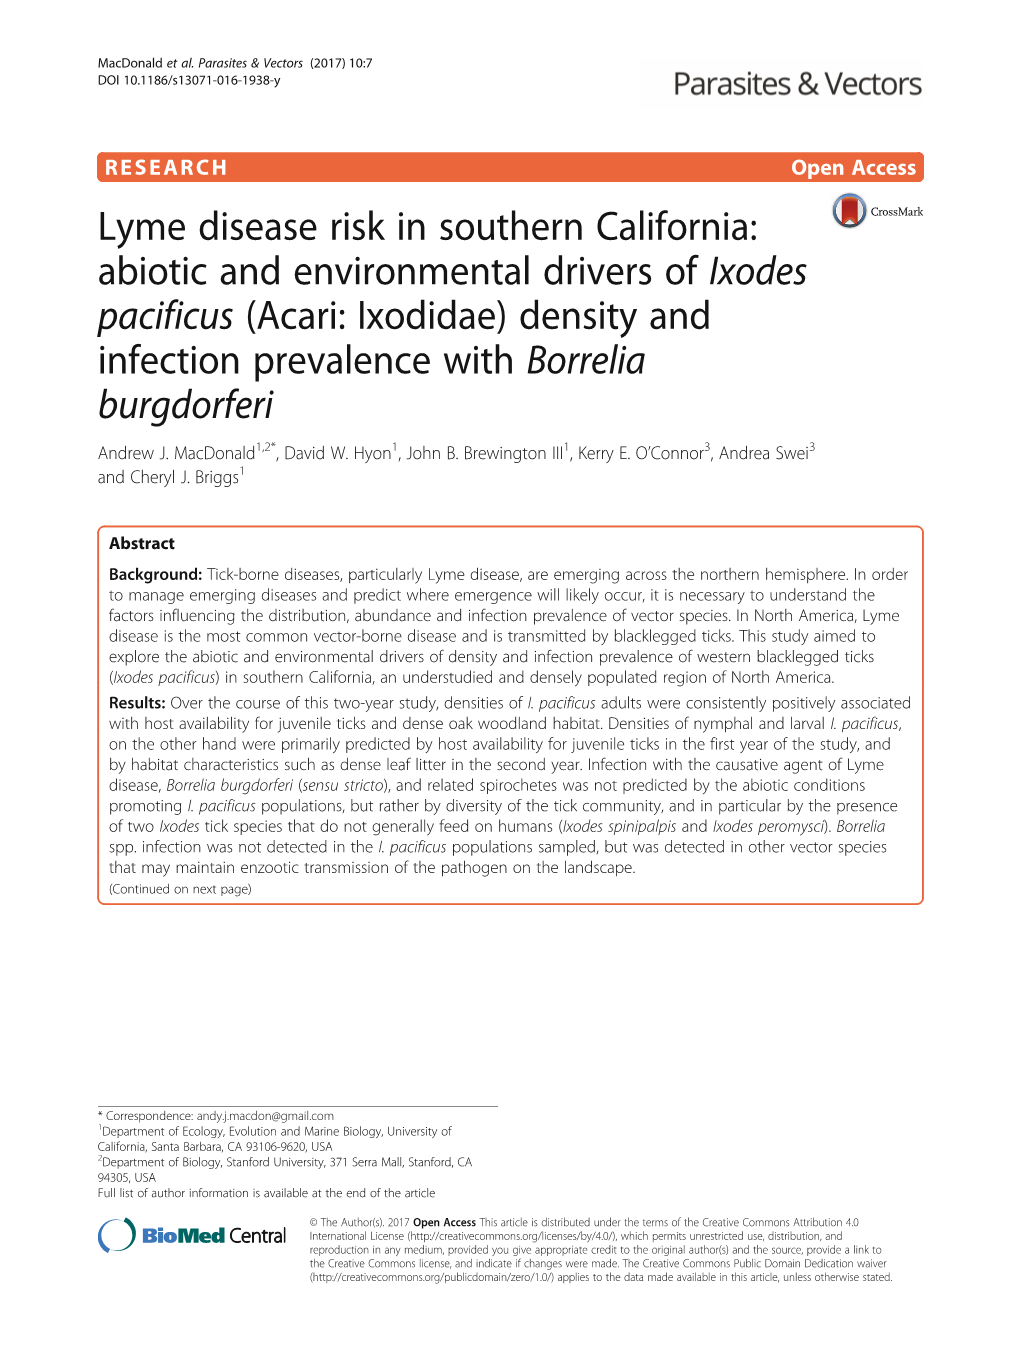 Lyme Disease Risk in Southern California